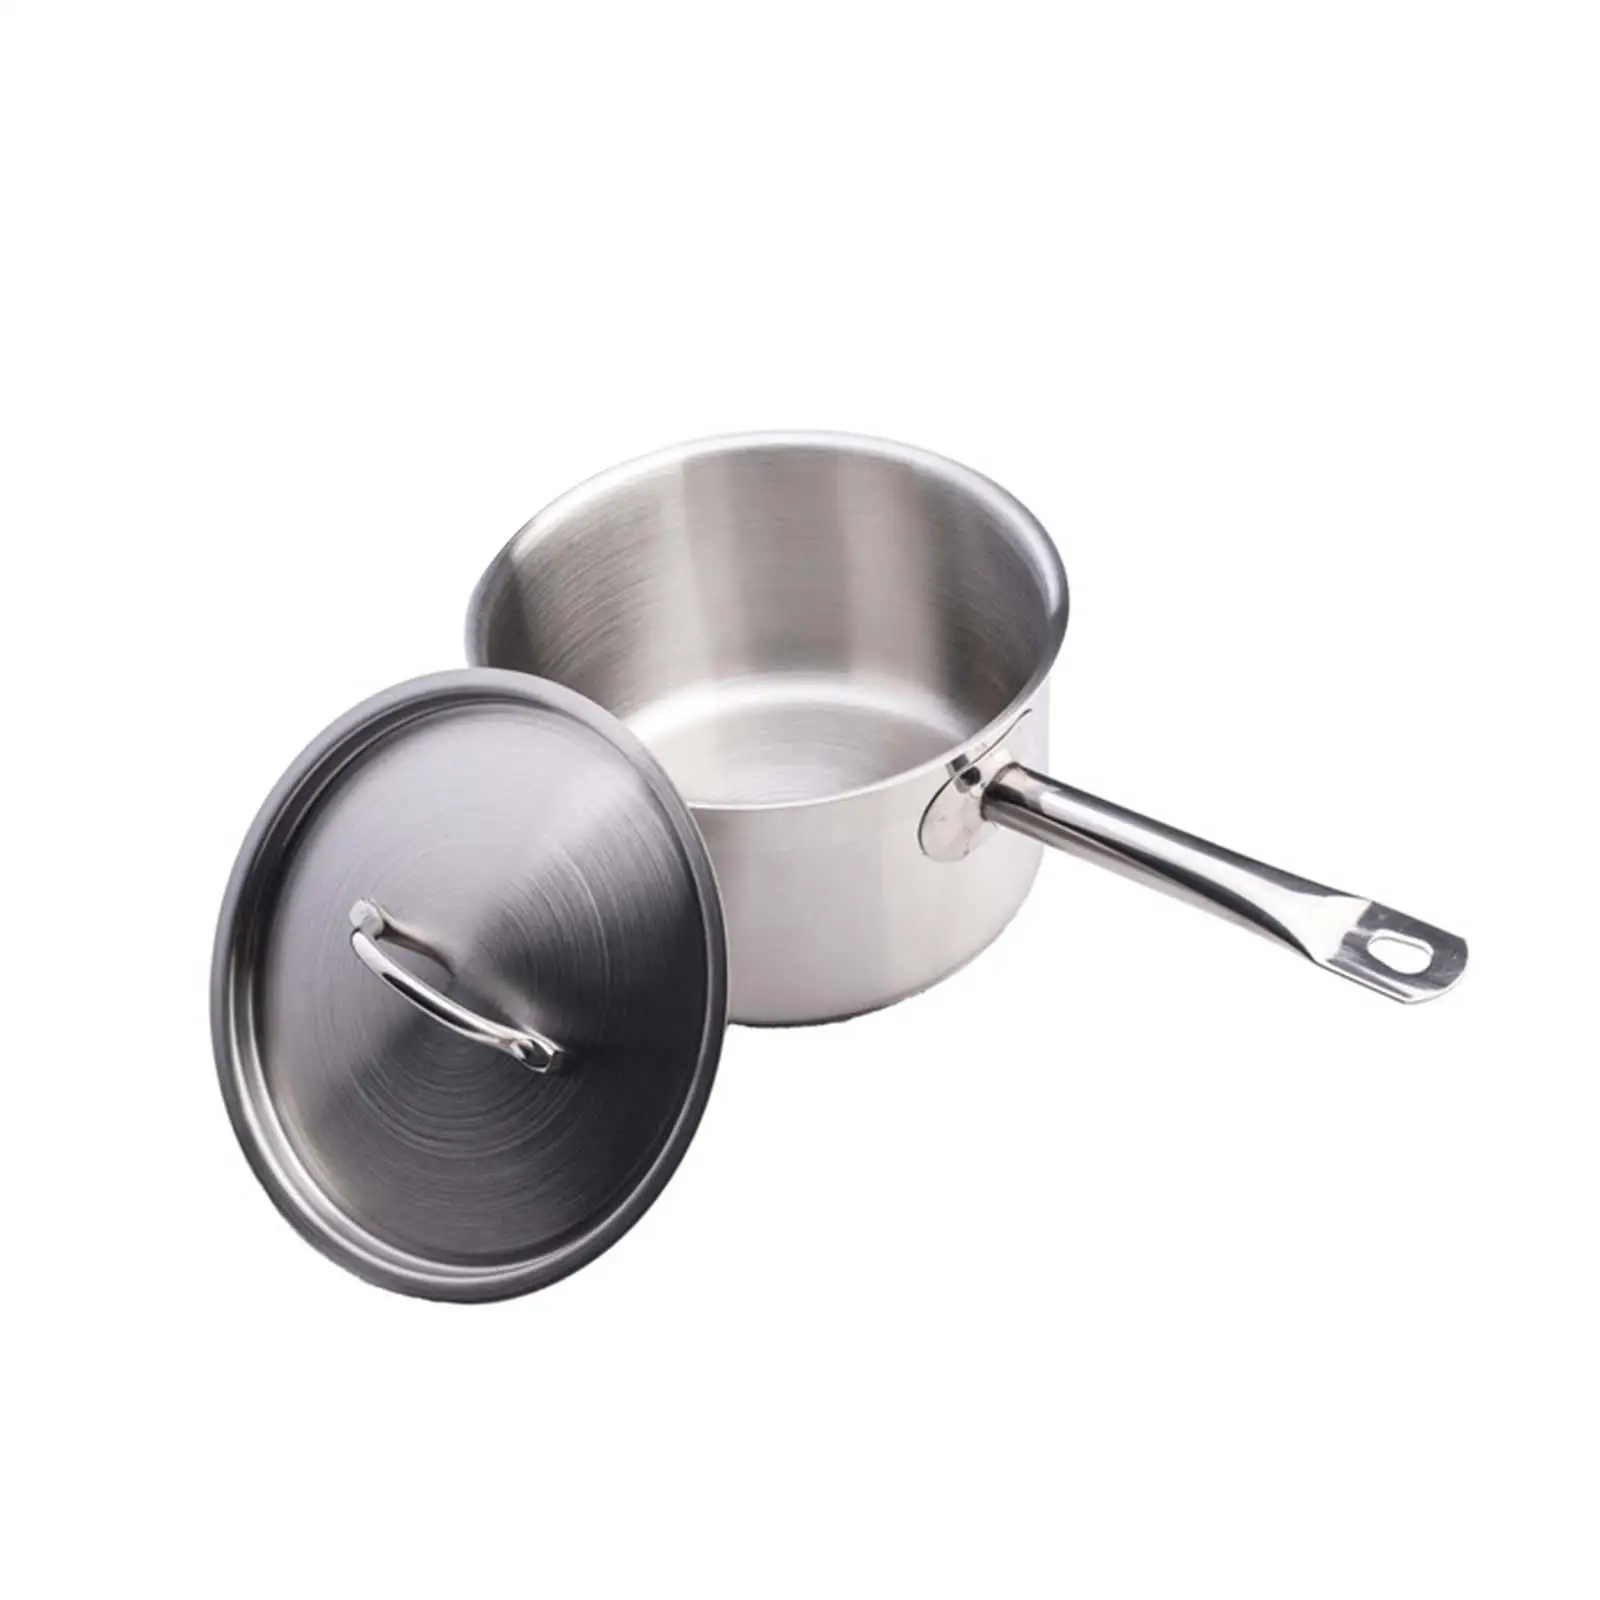 Professional Stainless Steel Sauce Pan with Lid Induction Milk Pots Milk Pan and Long Handle for Restaurant Gravies Boiling Milk